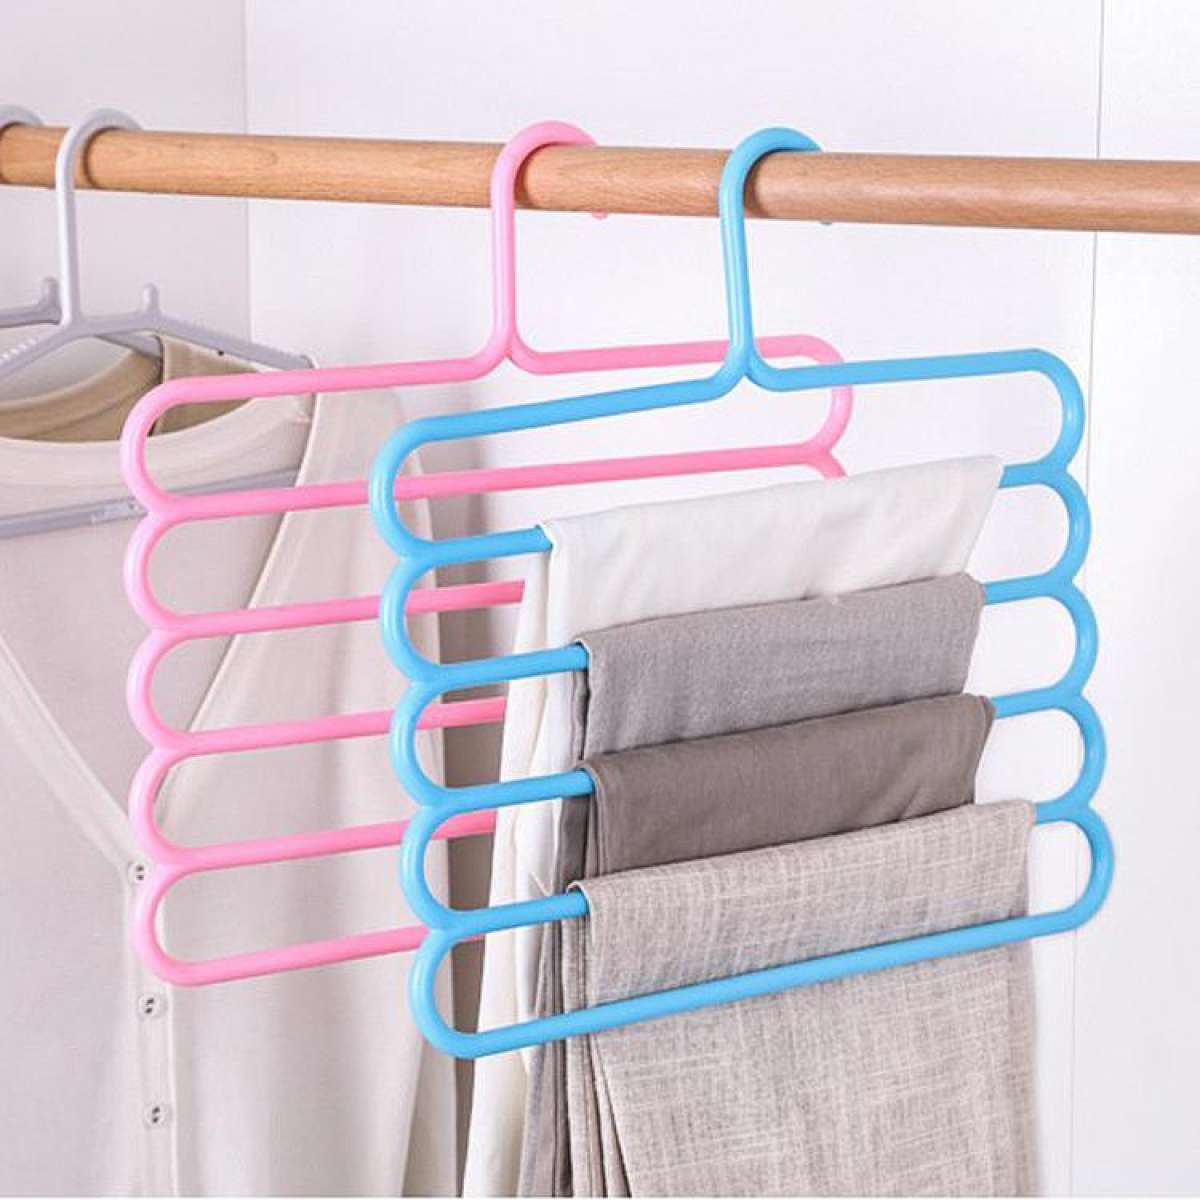 1 Wooden Trouser Hanger Multi Hangers 4 Trousers Space Saving Clothes Wood   eBay